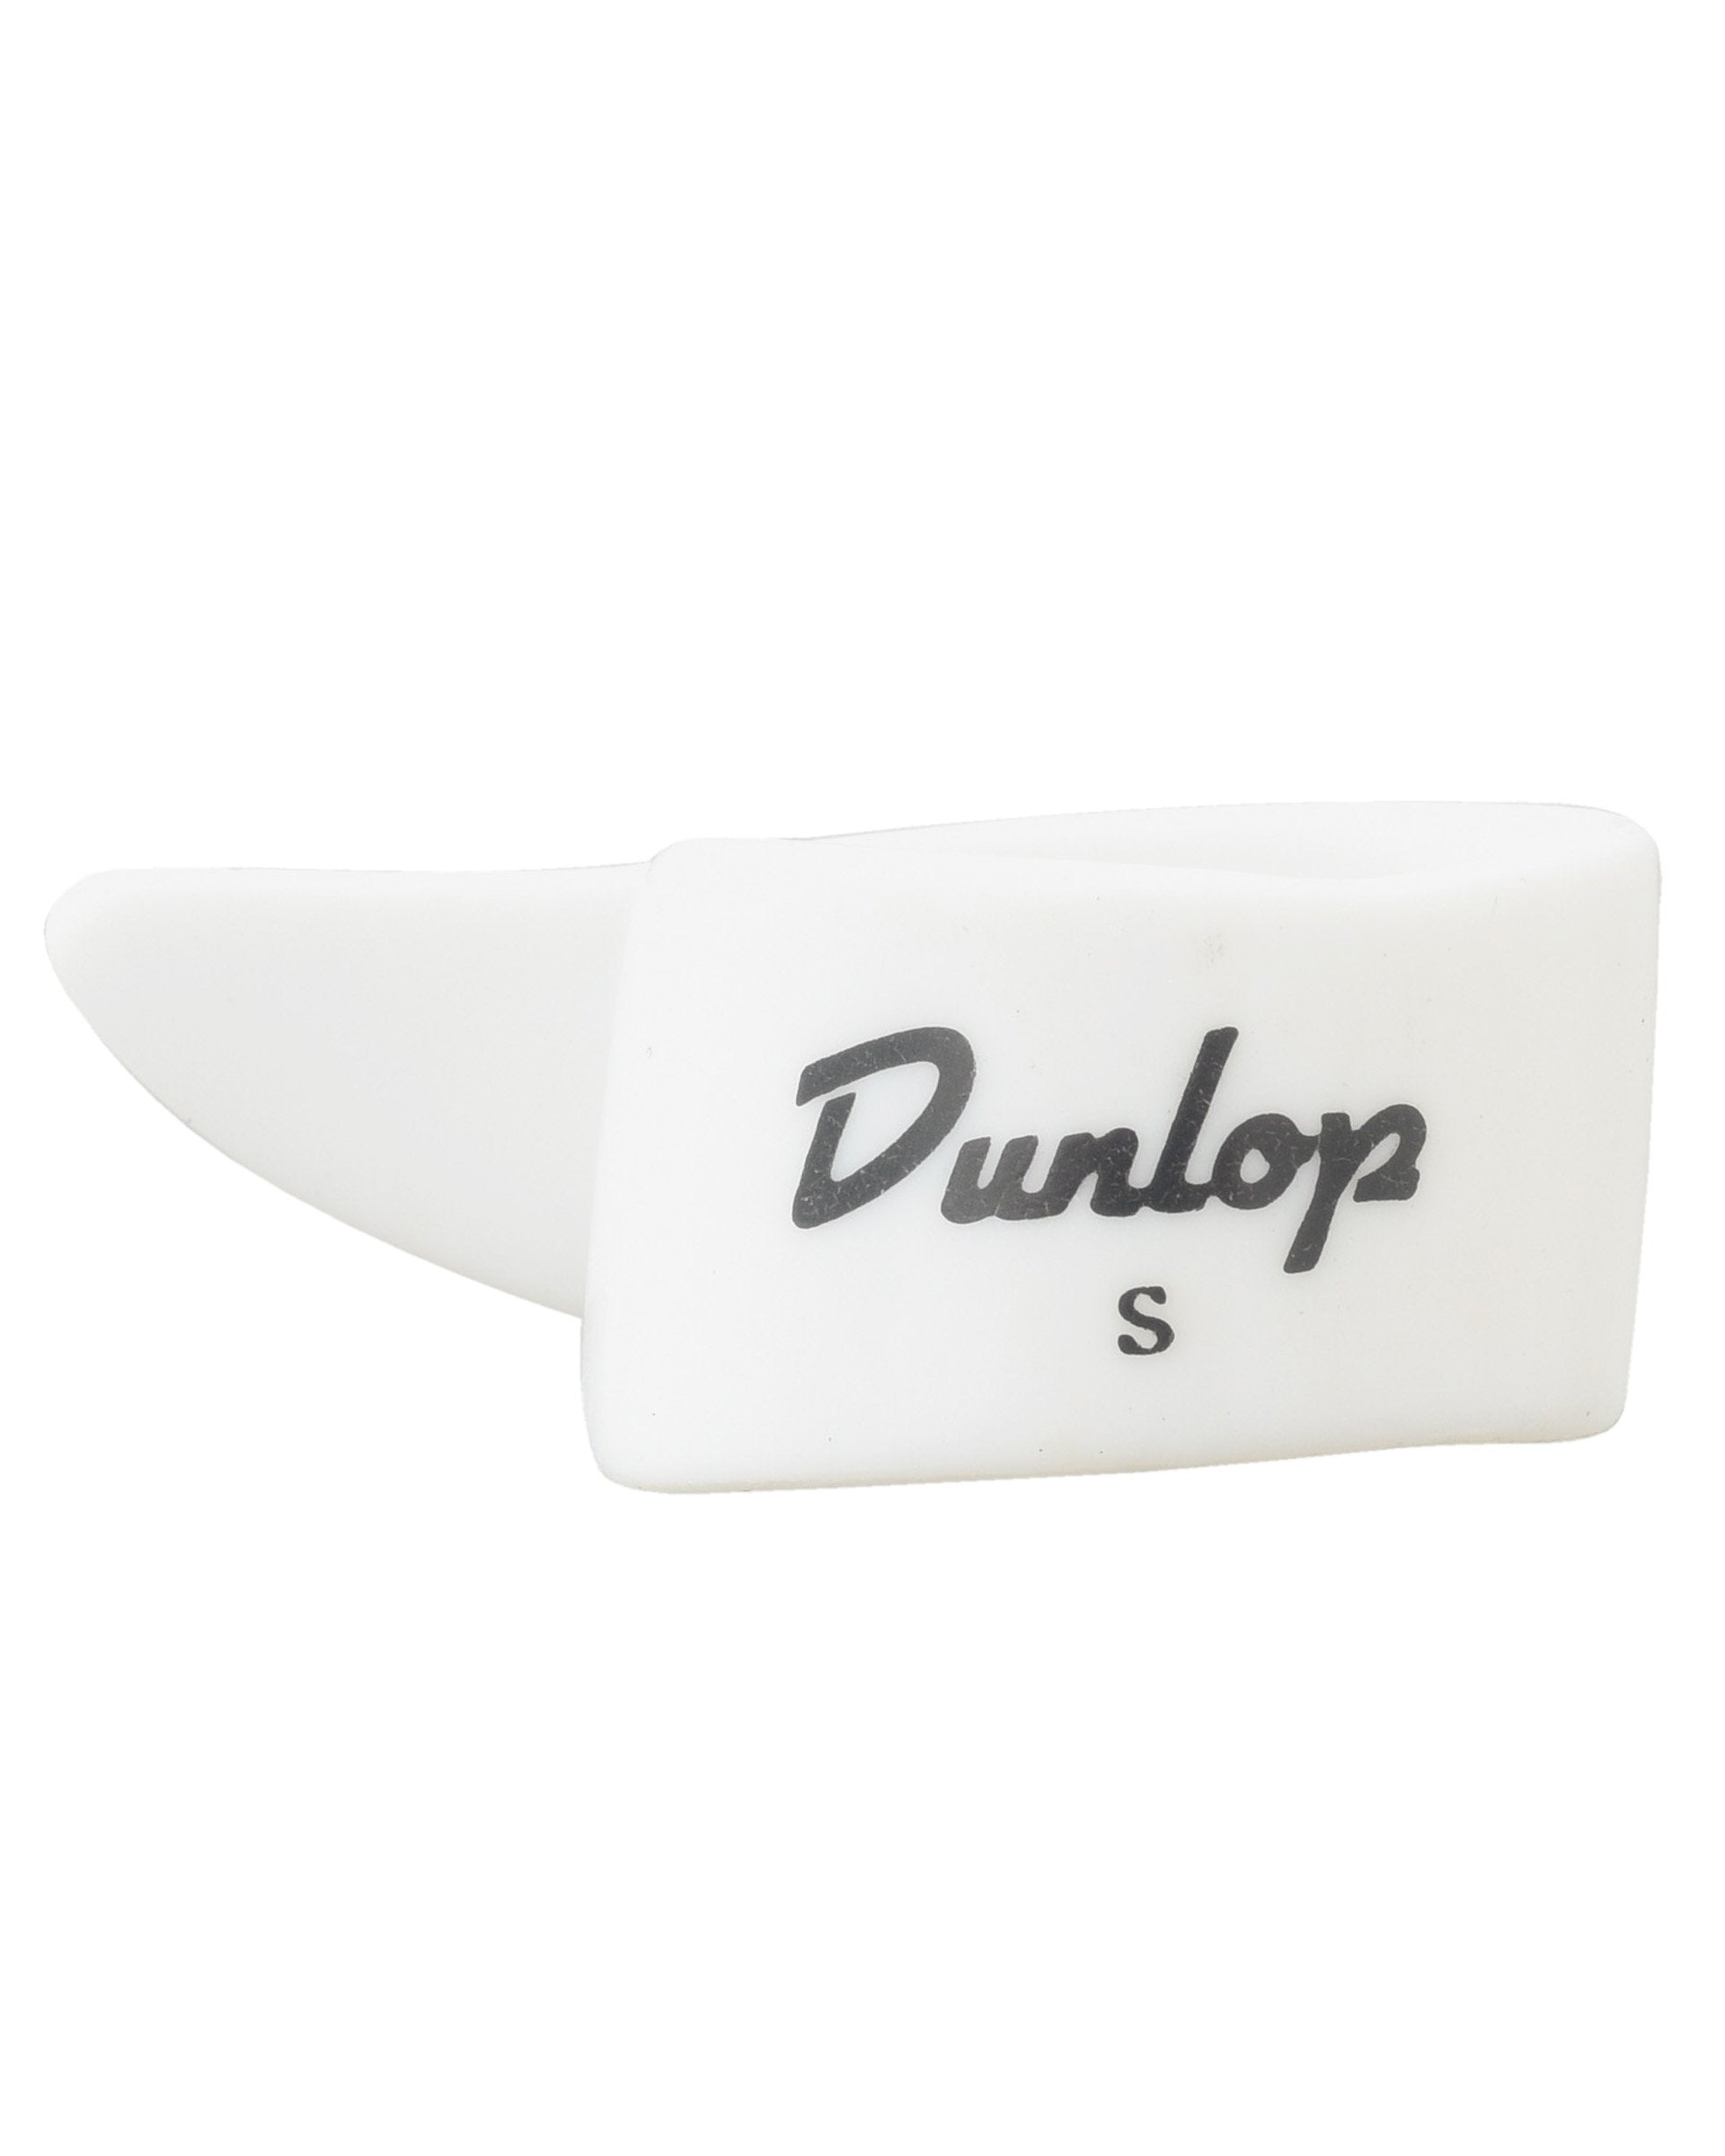 Image 1 of Dunlop White Plastic Thumbpick, Small - SKU# PK27-S-RHT : Product Type Accessories & Parts : Elderly Instruments